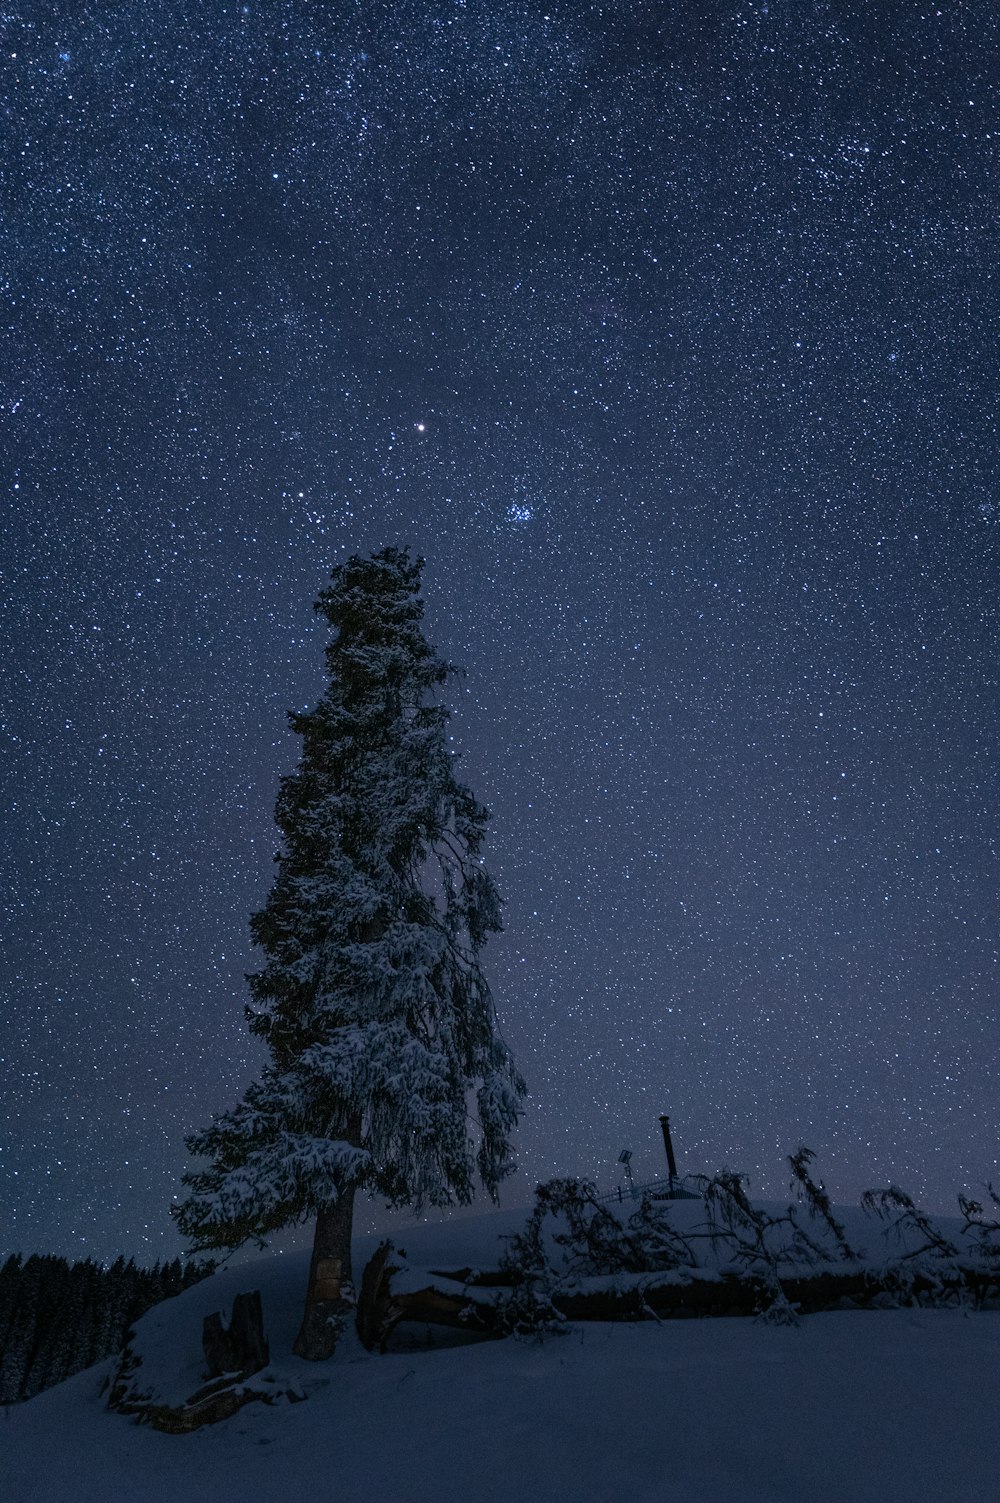 the night sky with stars above a snow covered tree